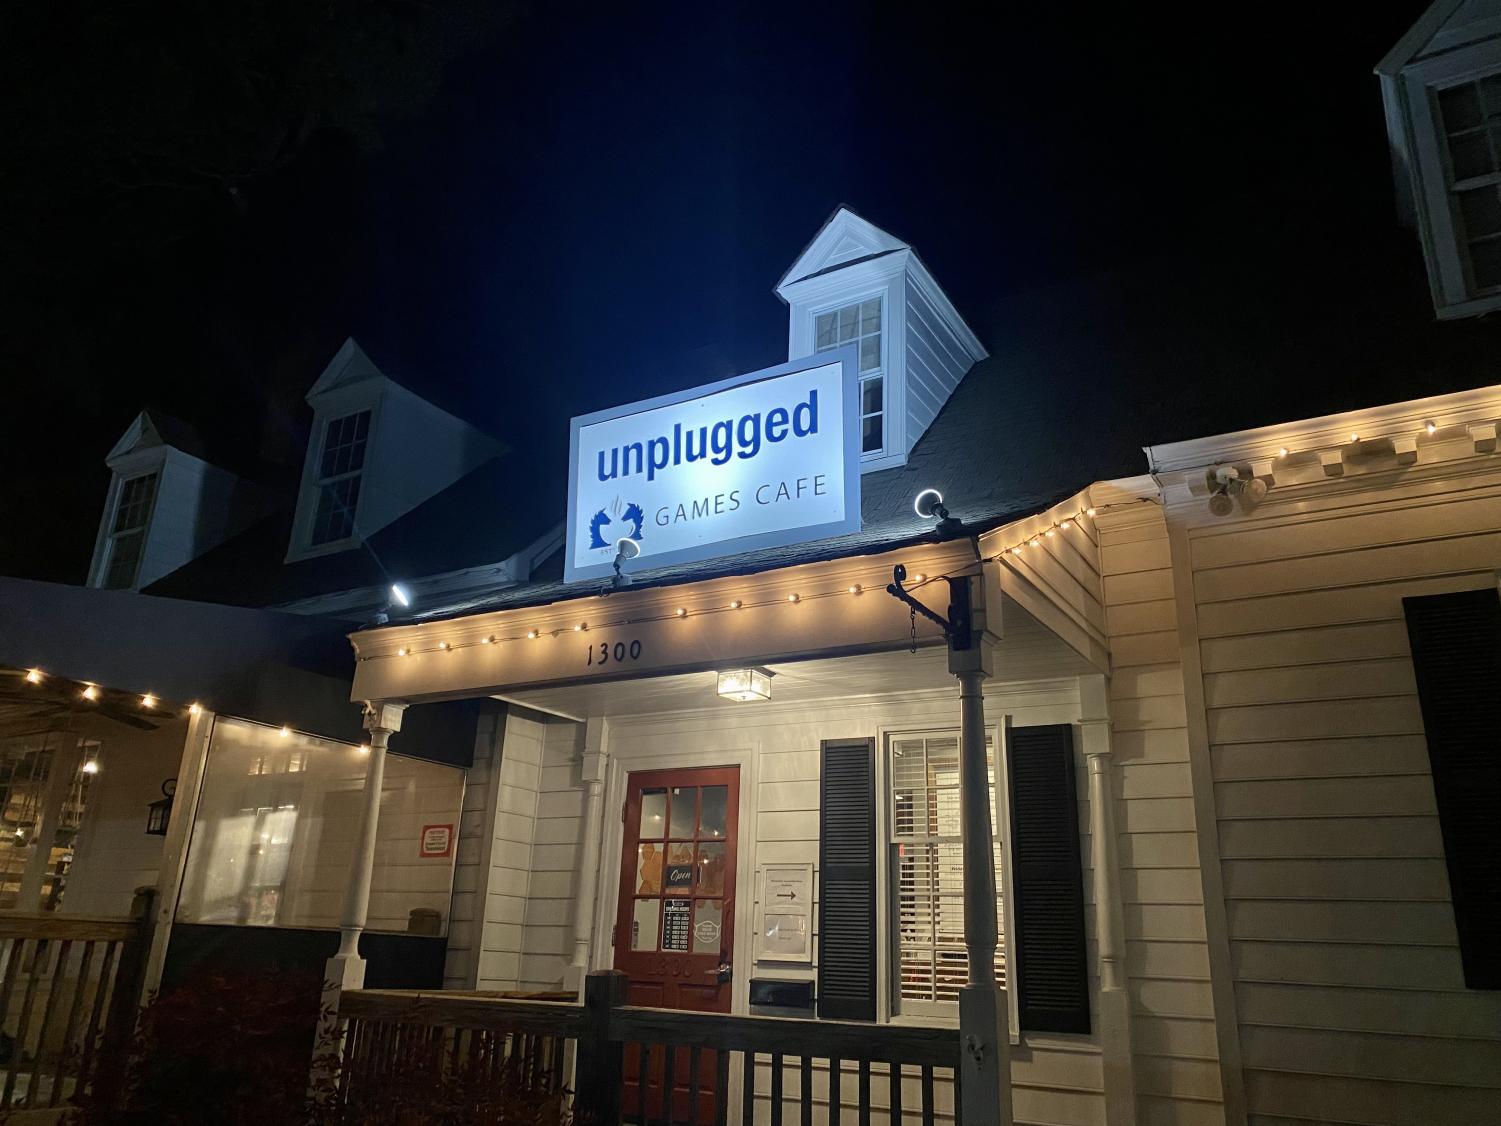 Unplugged Games Cafe reinvents dining through board games – Midlo Scoop